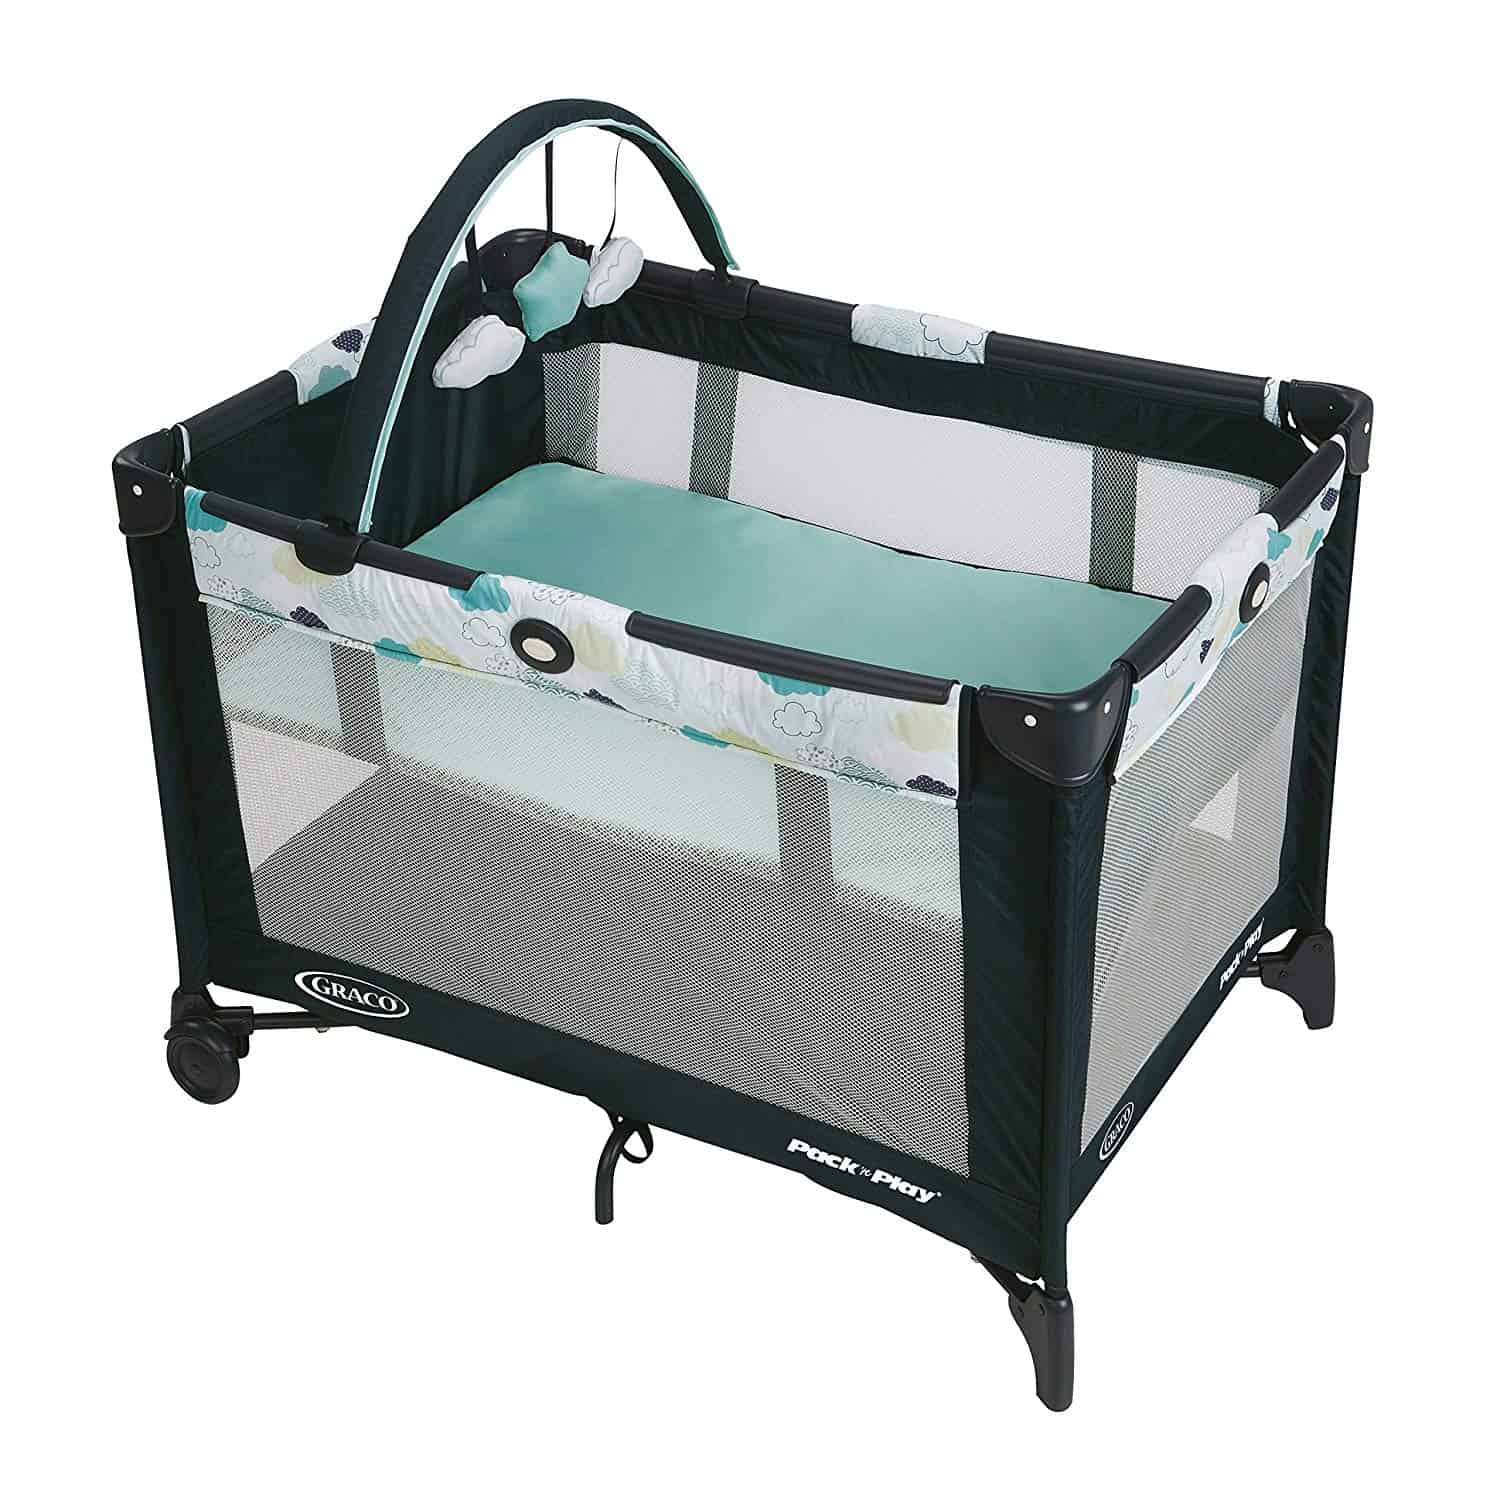 how to set up graco playpen